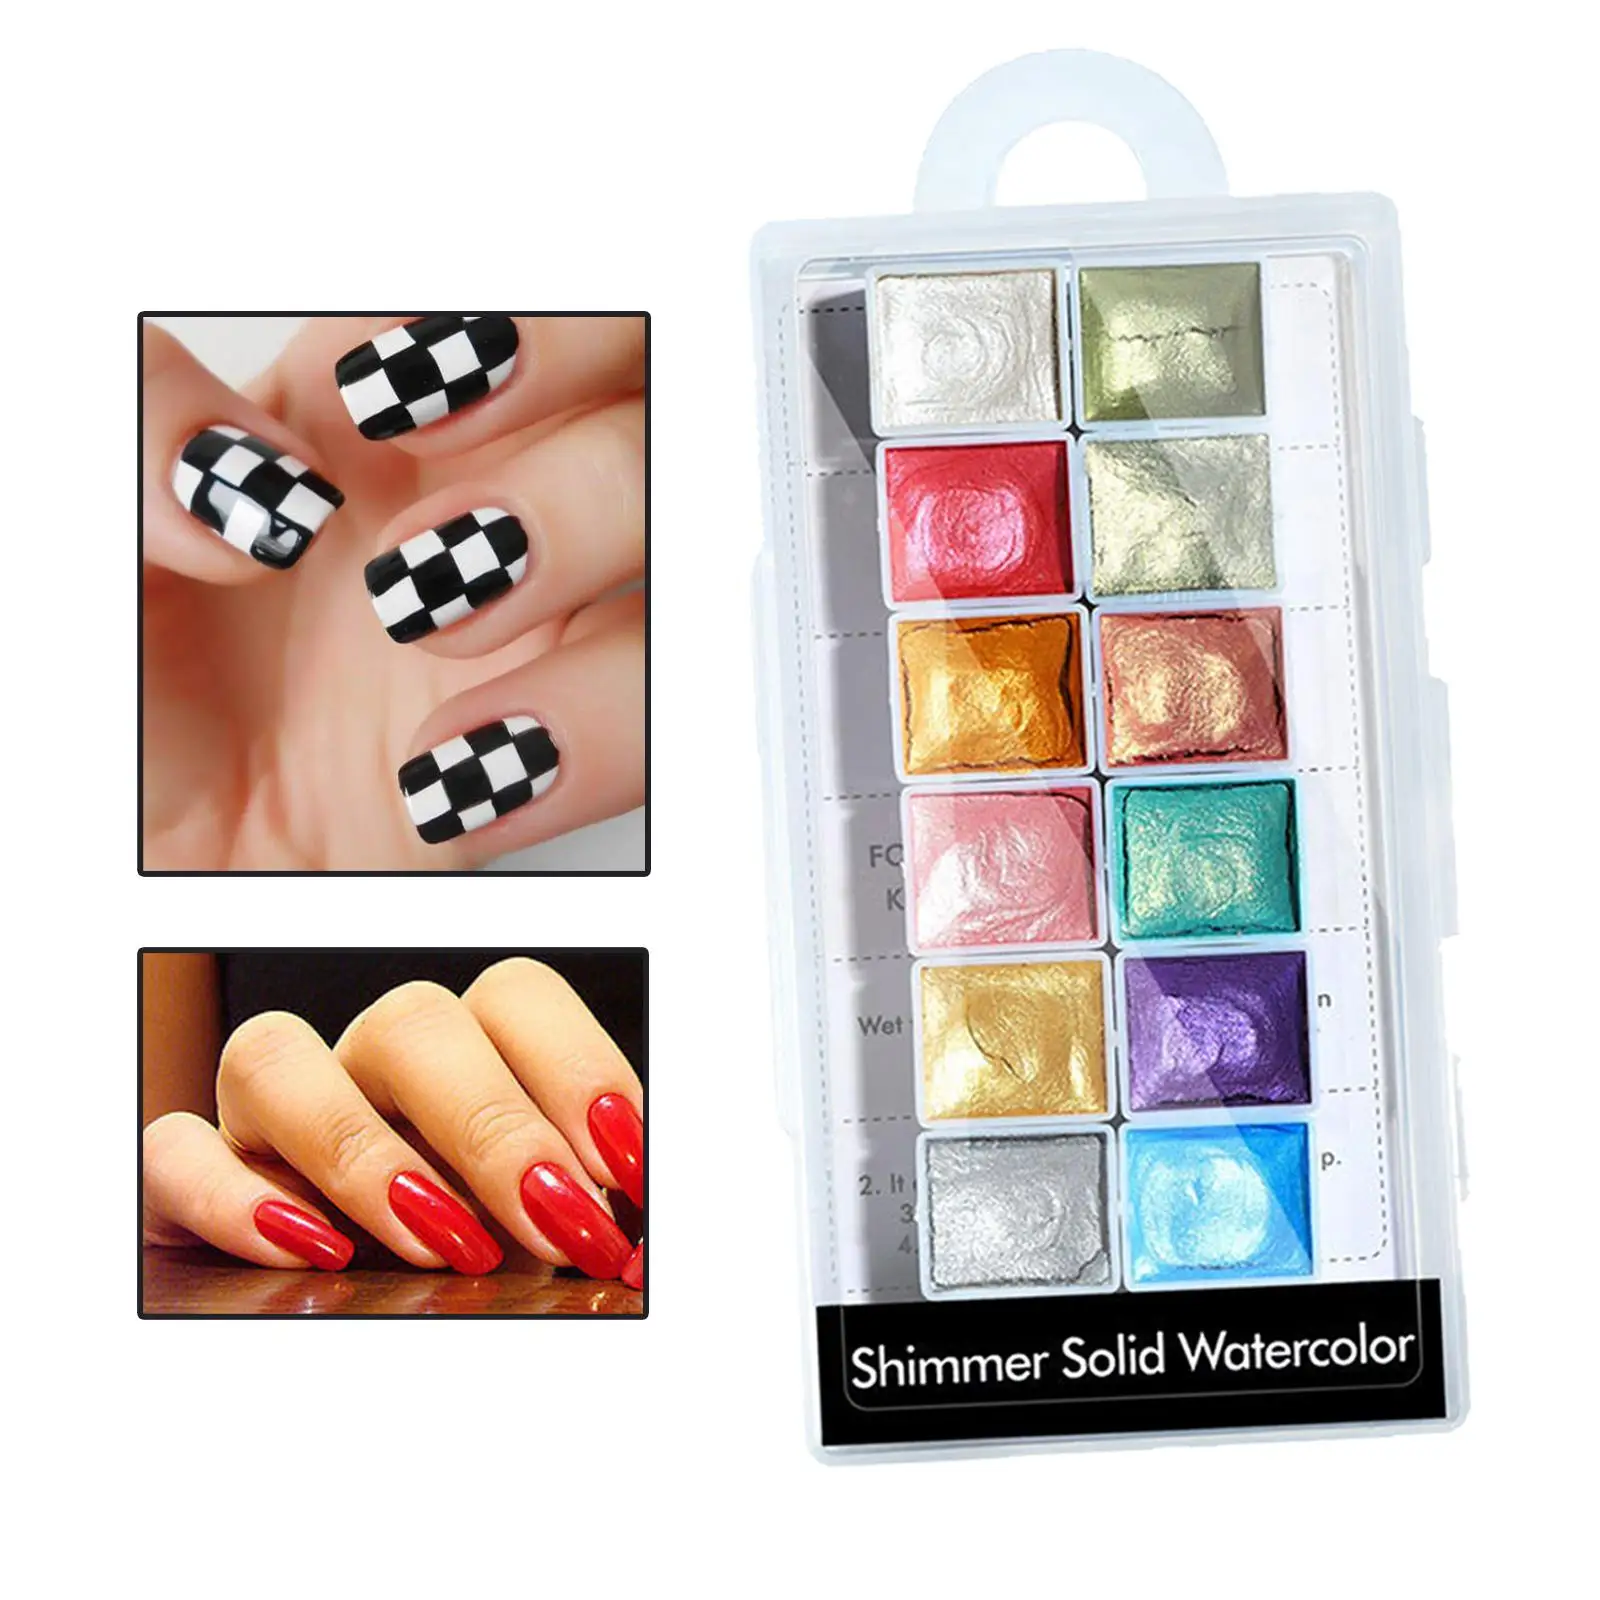 6 Colors Assorted Glitter Shimmer Solid Watercolor Palette Travel Pocket Set Nail Art Pigments for Artists